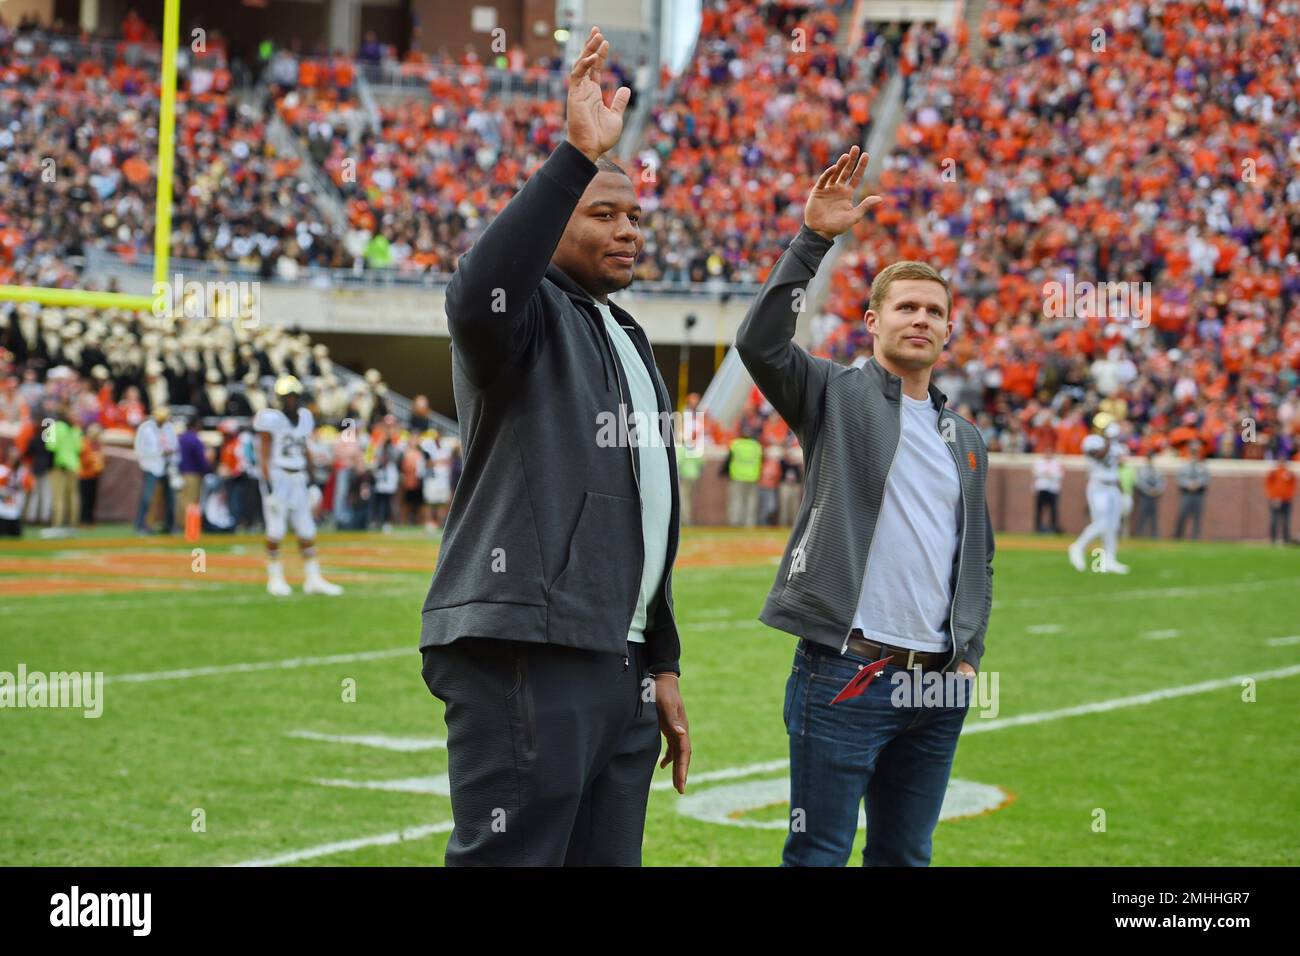 Former Clemson standouts and now current NFL players (l-r) Dexter Lawrence-New York Giants and Adam Humphries-Tennessee Titans, greet the fans during the first half of an NCAA college football game against Wake